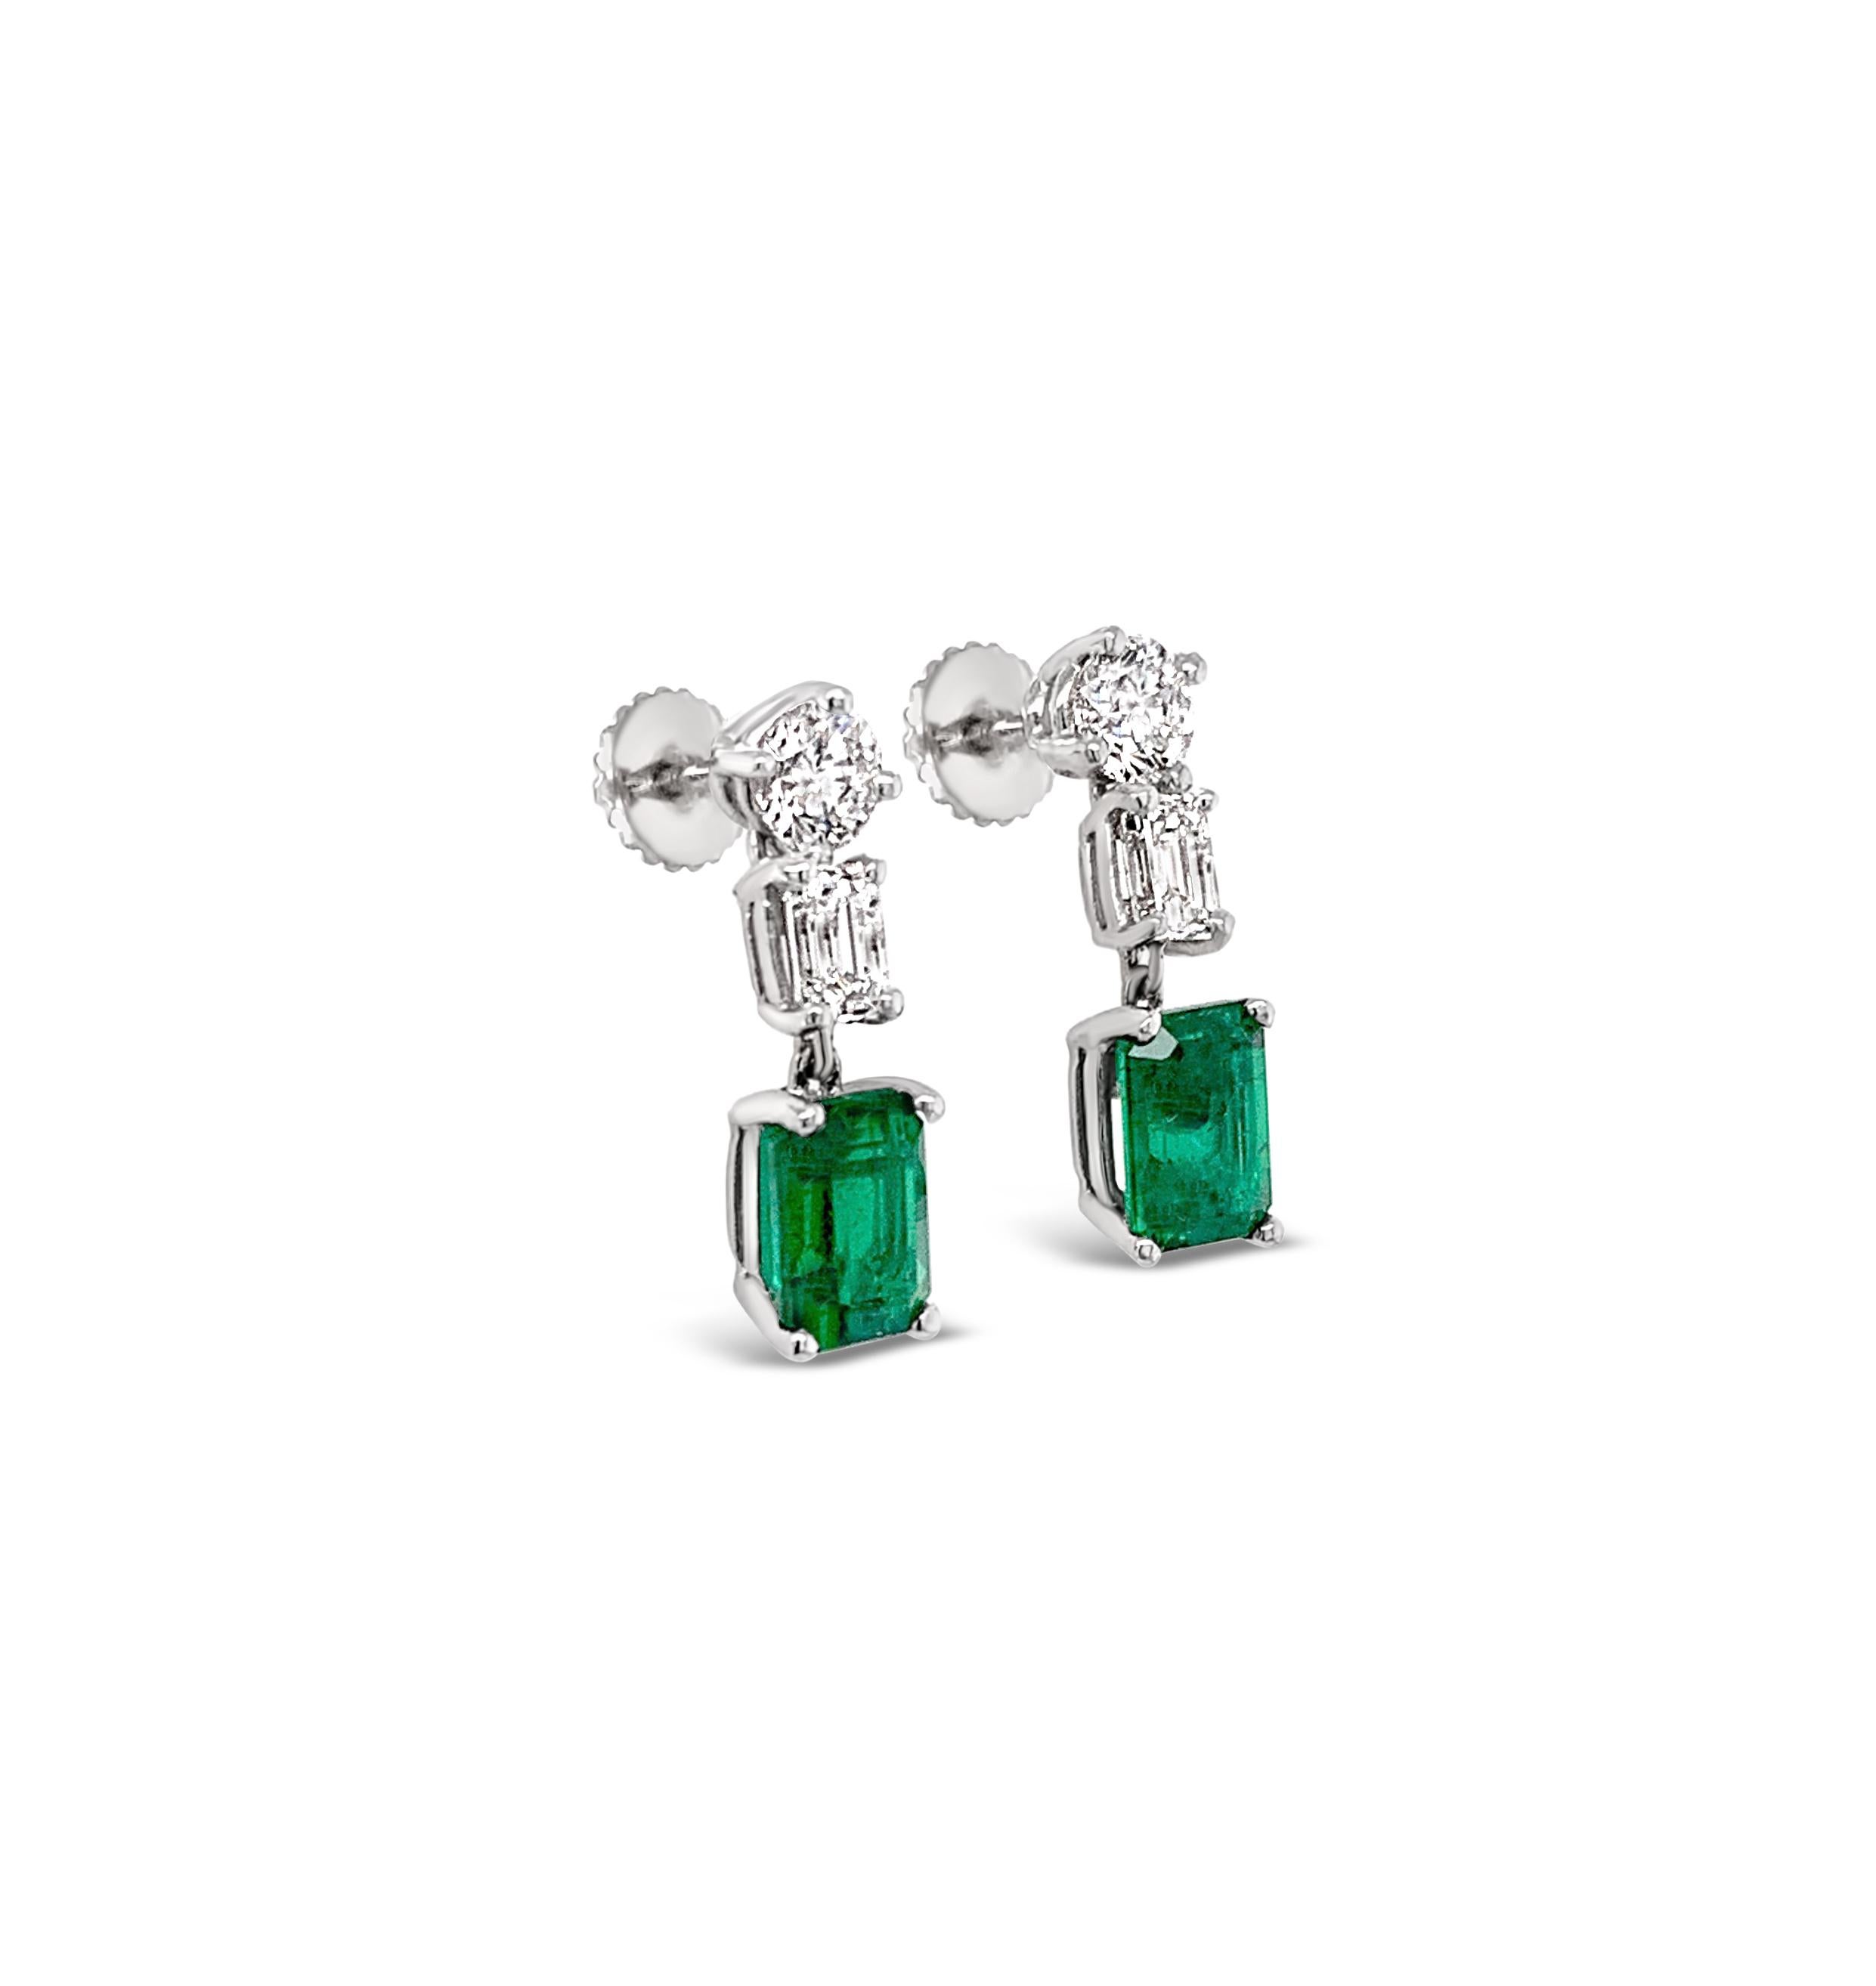 Emerald and Diamond Earrings in Platinum.  Emerald-cut emeralds weigh 1.57 Carat (total weight).  Round brilliant cut and emerald-cut diamonds weigh 0.97 Carat (total weight).  Diamond color grade is G-H and clarity range is VS-VS2.  The earrings